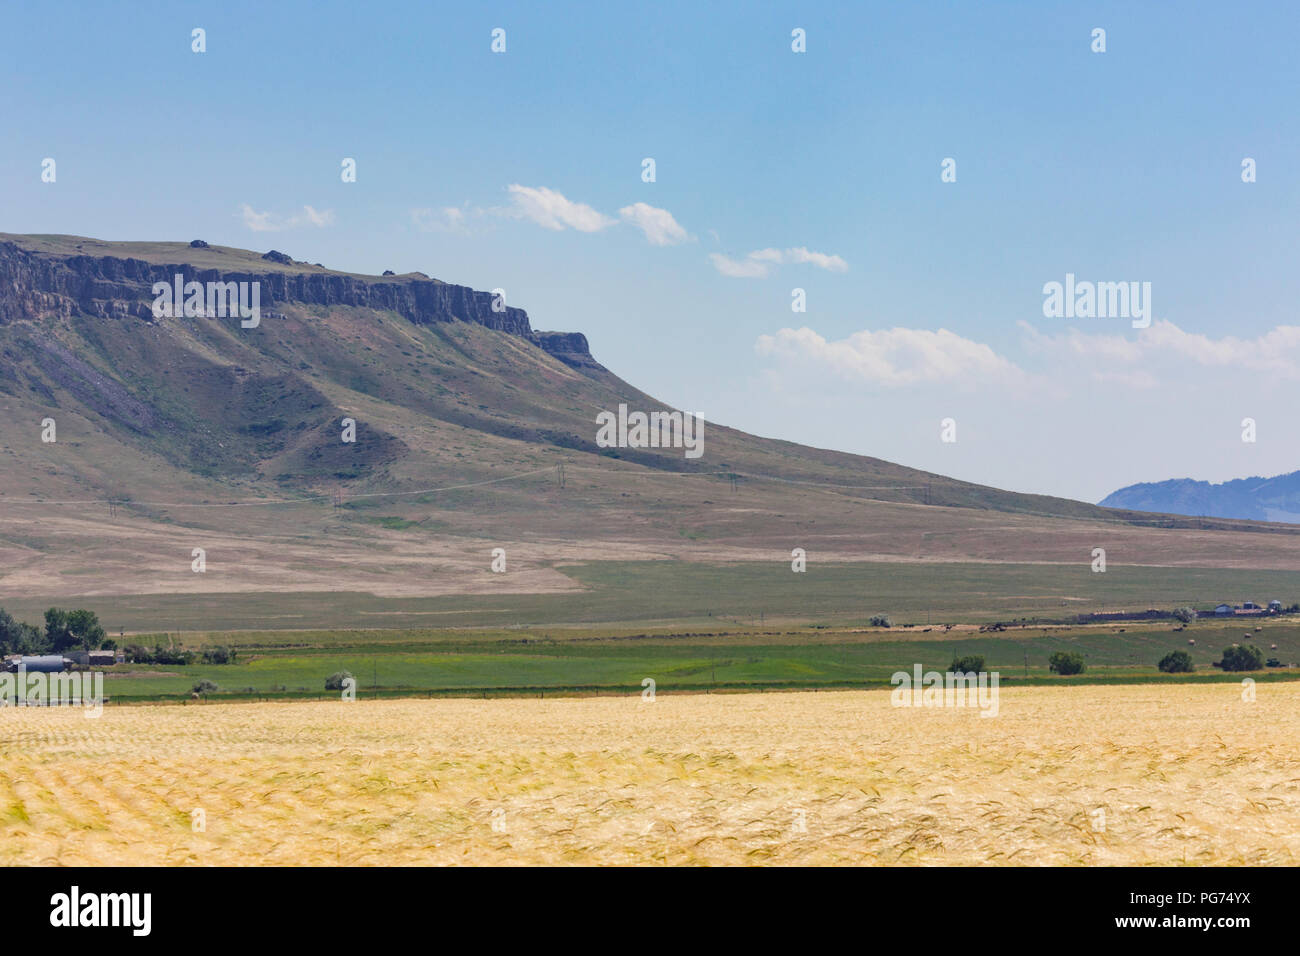 Square Butte is an iconic landmark in Montana, USA Stock Photo